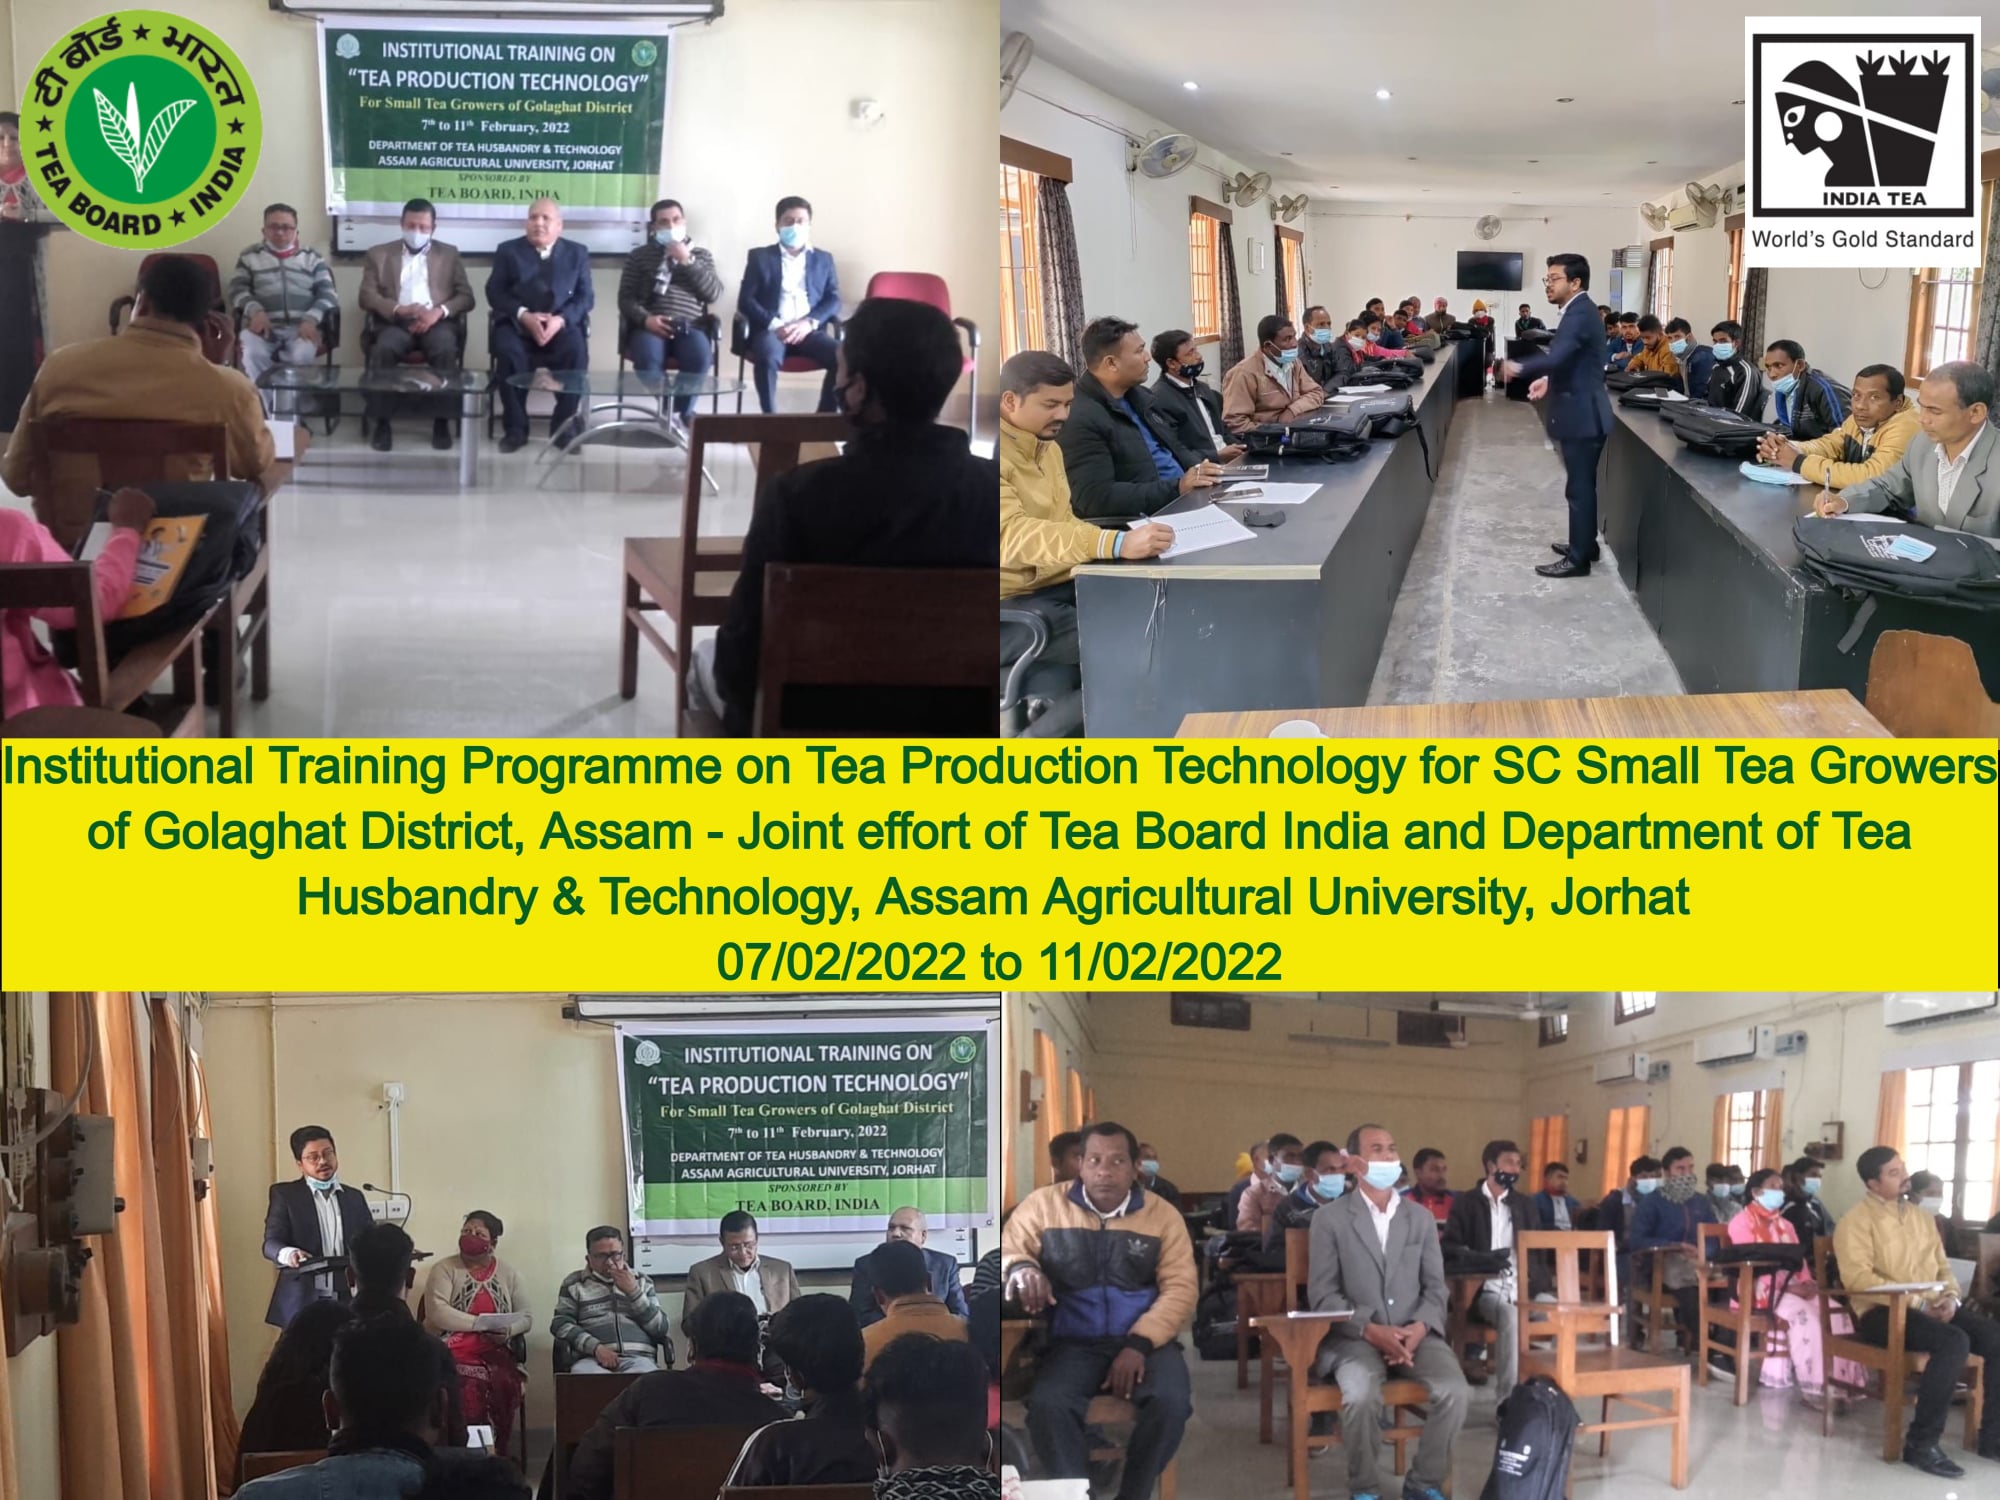 Institutional Training Programme on Tea Production Technology for SC Small Tea Growers of Golaghat District, Assam, 7th February to 11th February 2022